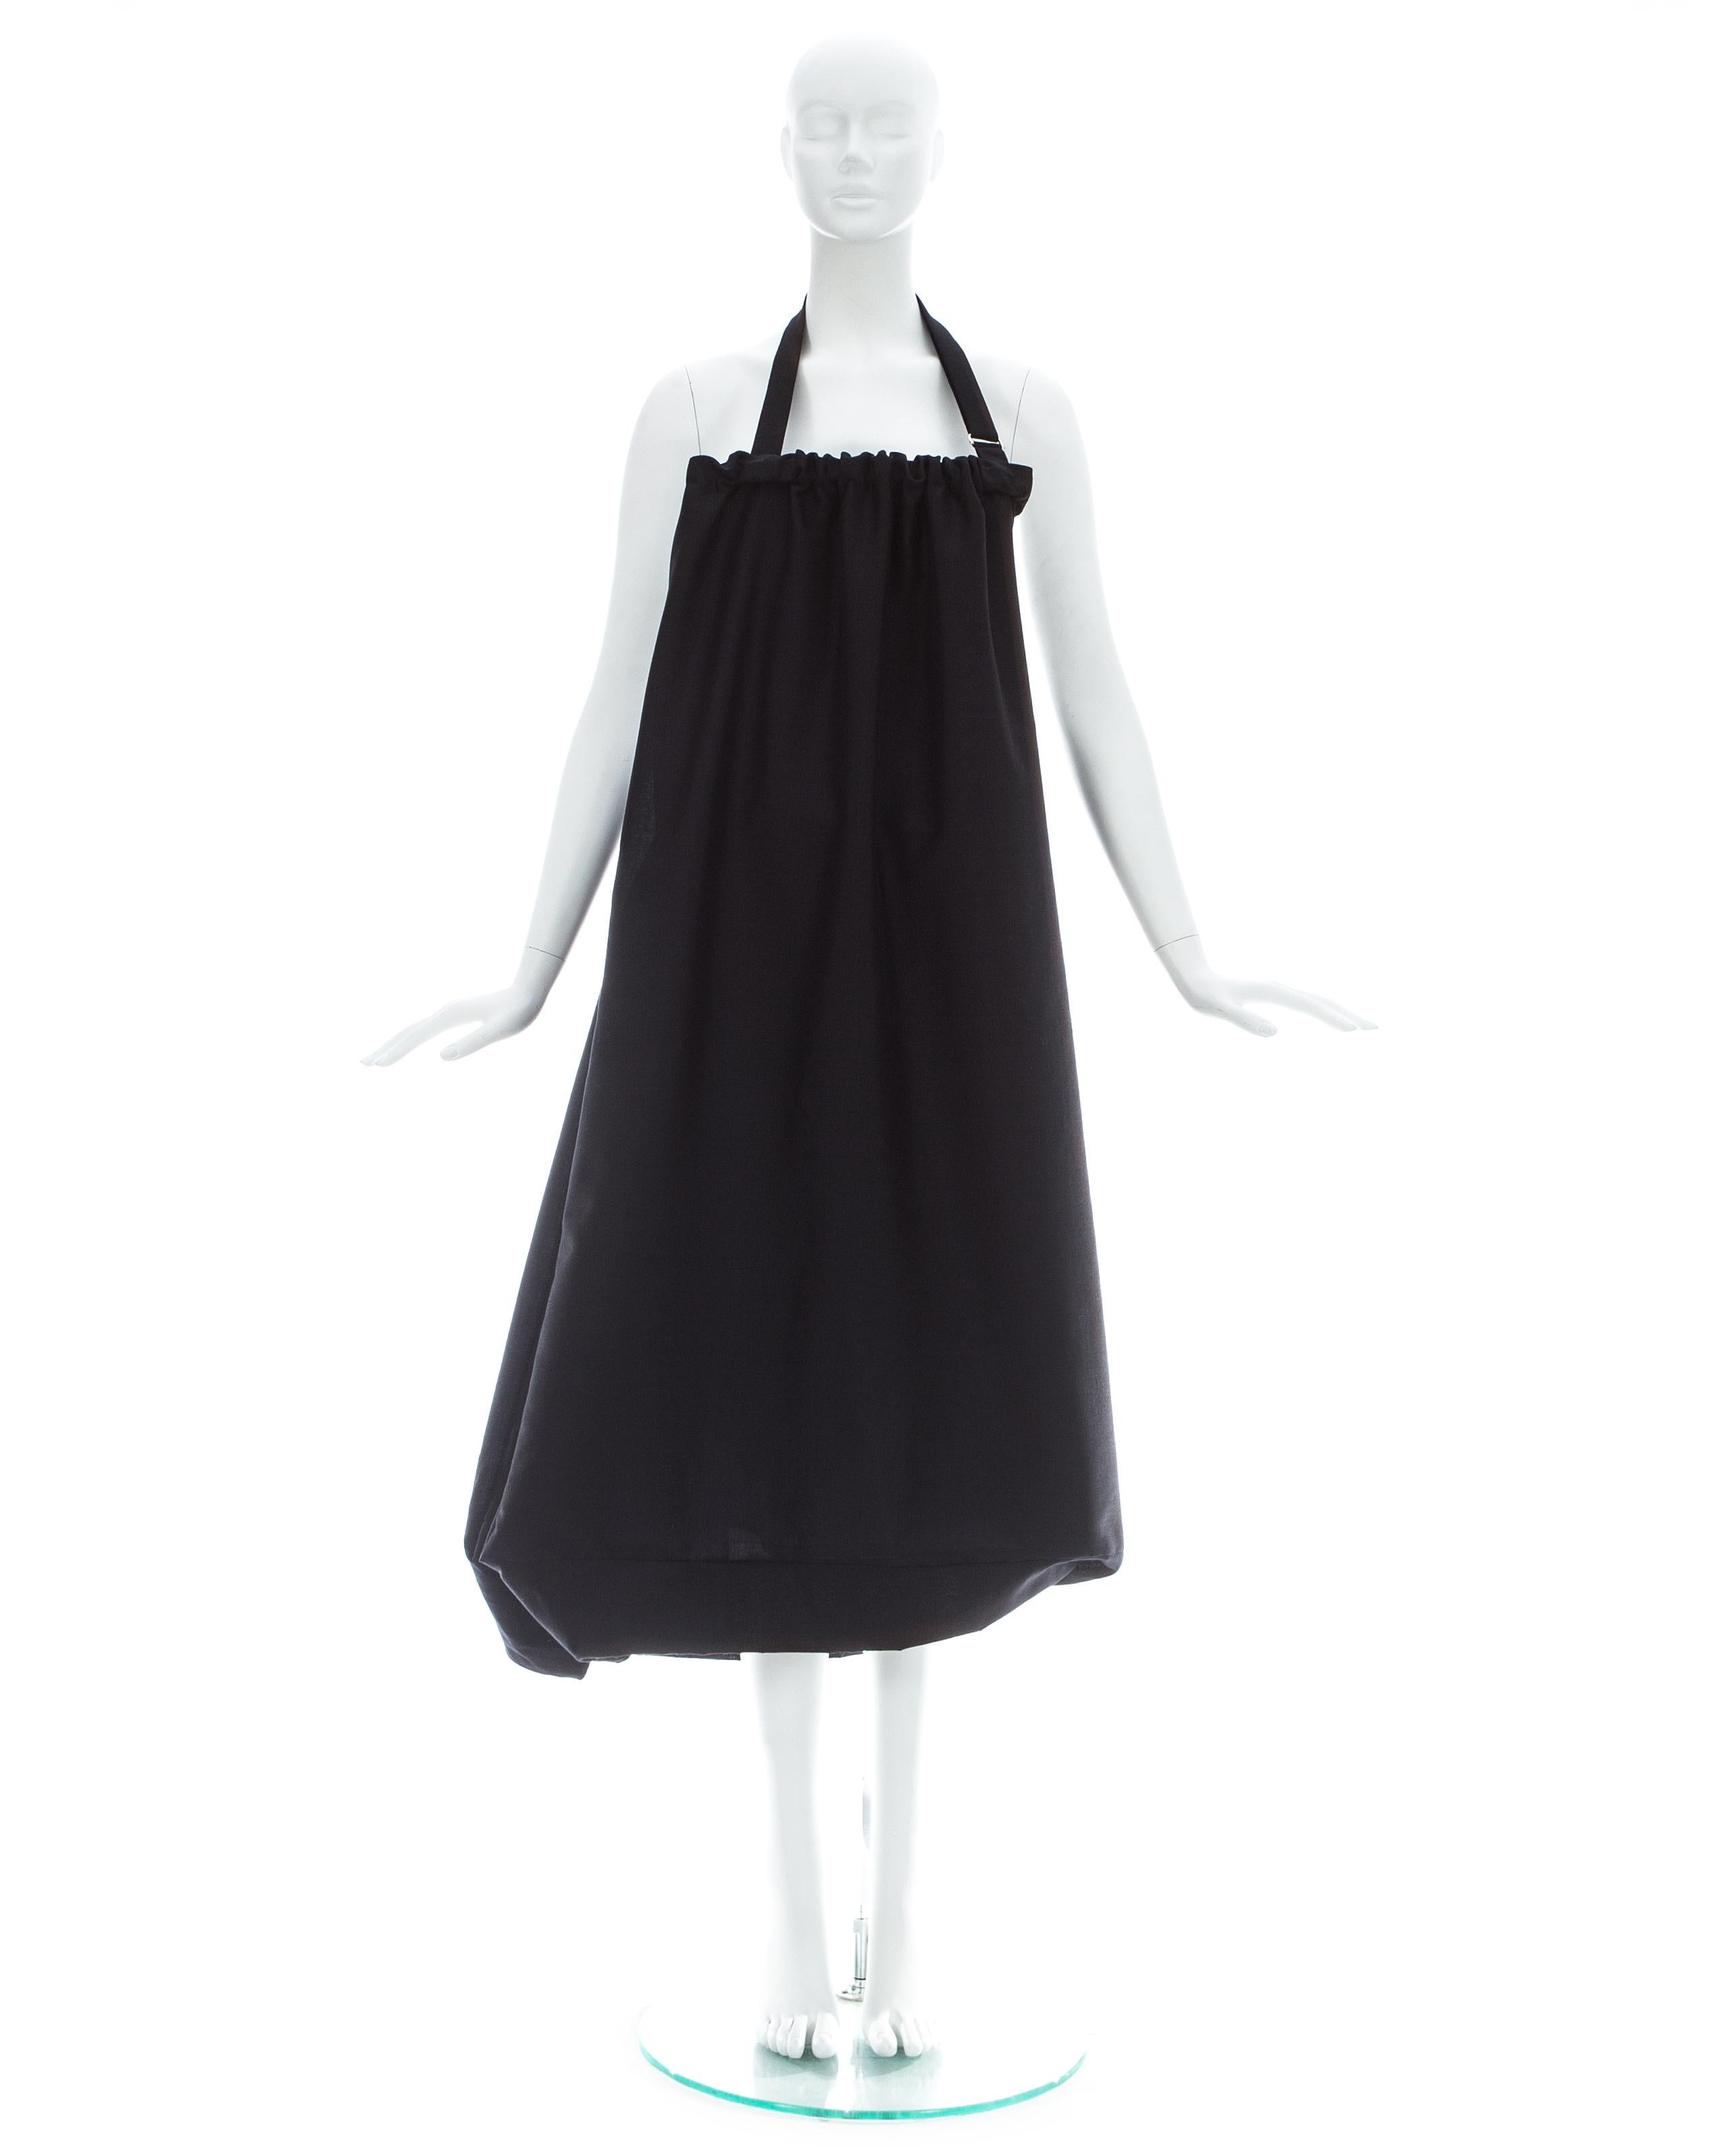 Yohji Yamamoto; Black wool dress with built-in functioning bag and adjustable strap. This garment can also be worn as a skirt

Spring-Summer 2001